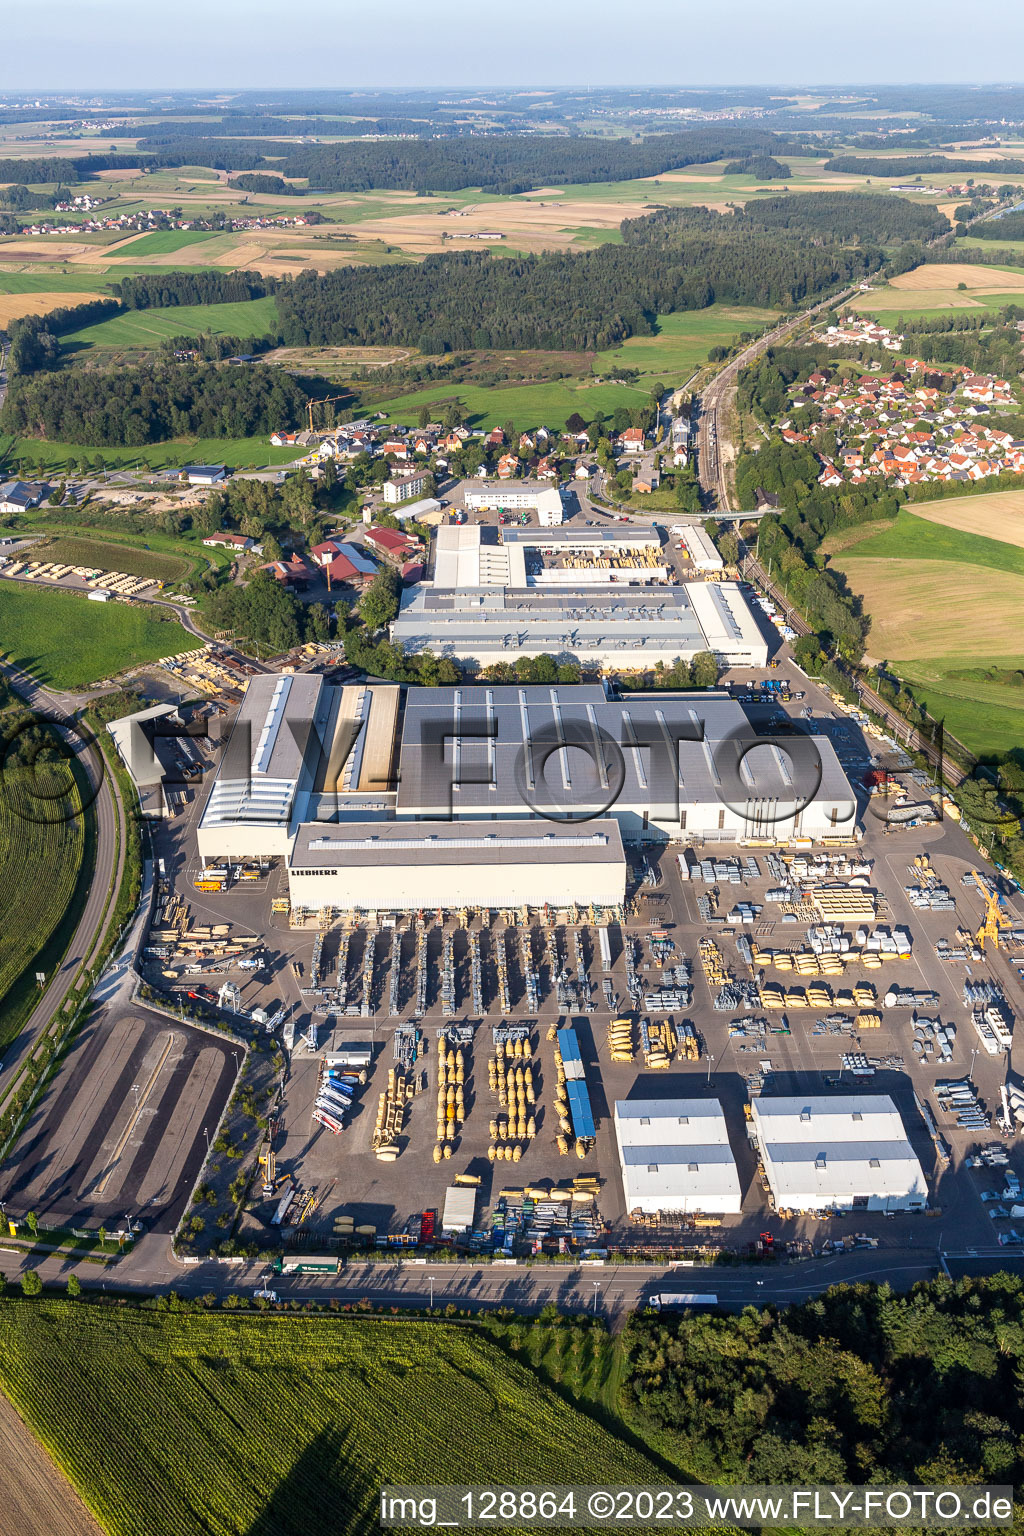 Building and production halls on the premises of Liebherr-Mischtechnik GmbH in Bad Schussenried in the state Baden-Wuerttemberg, Germany seen from above